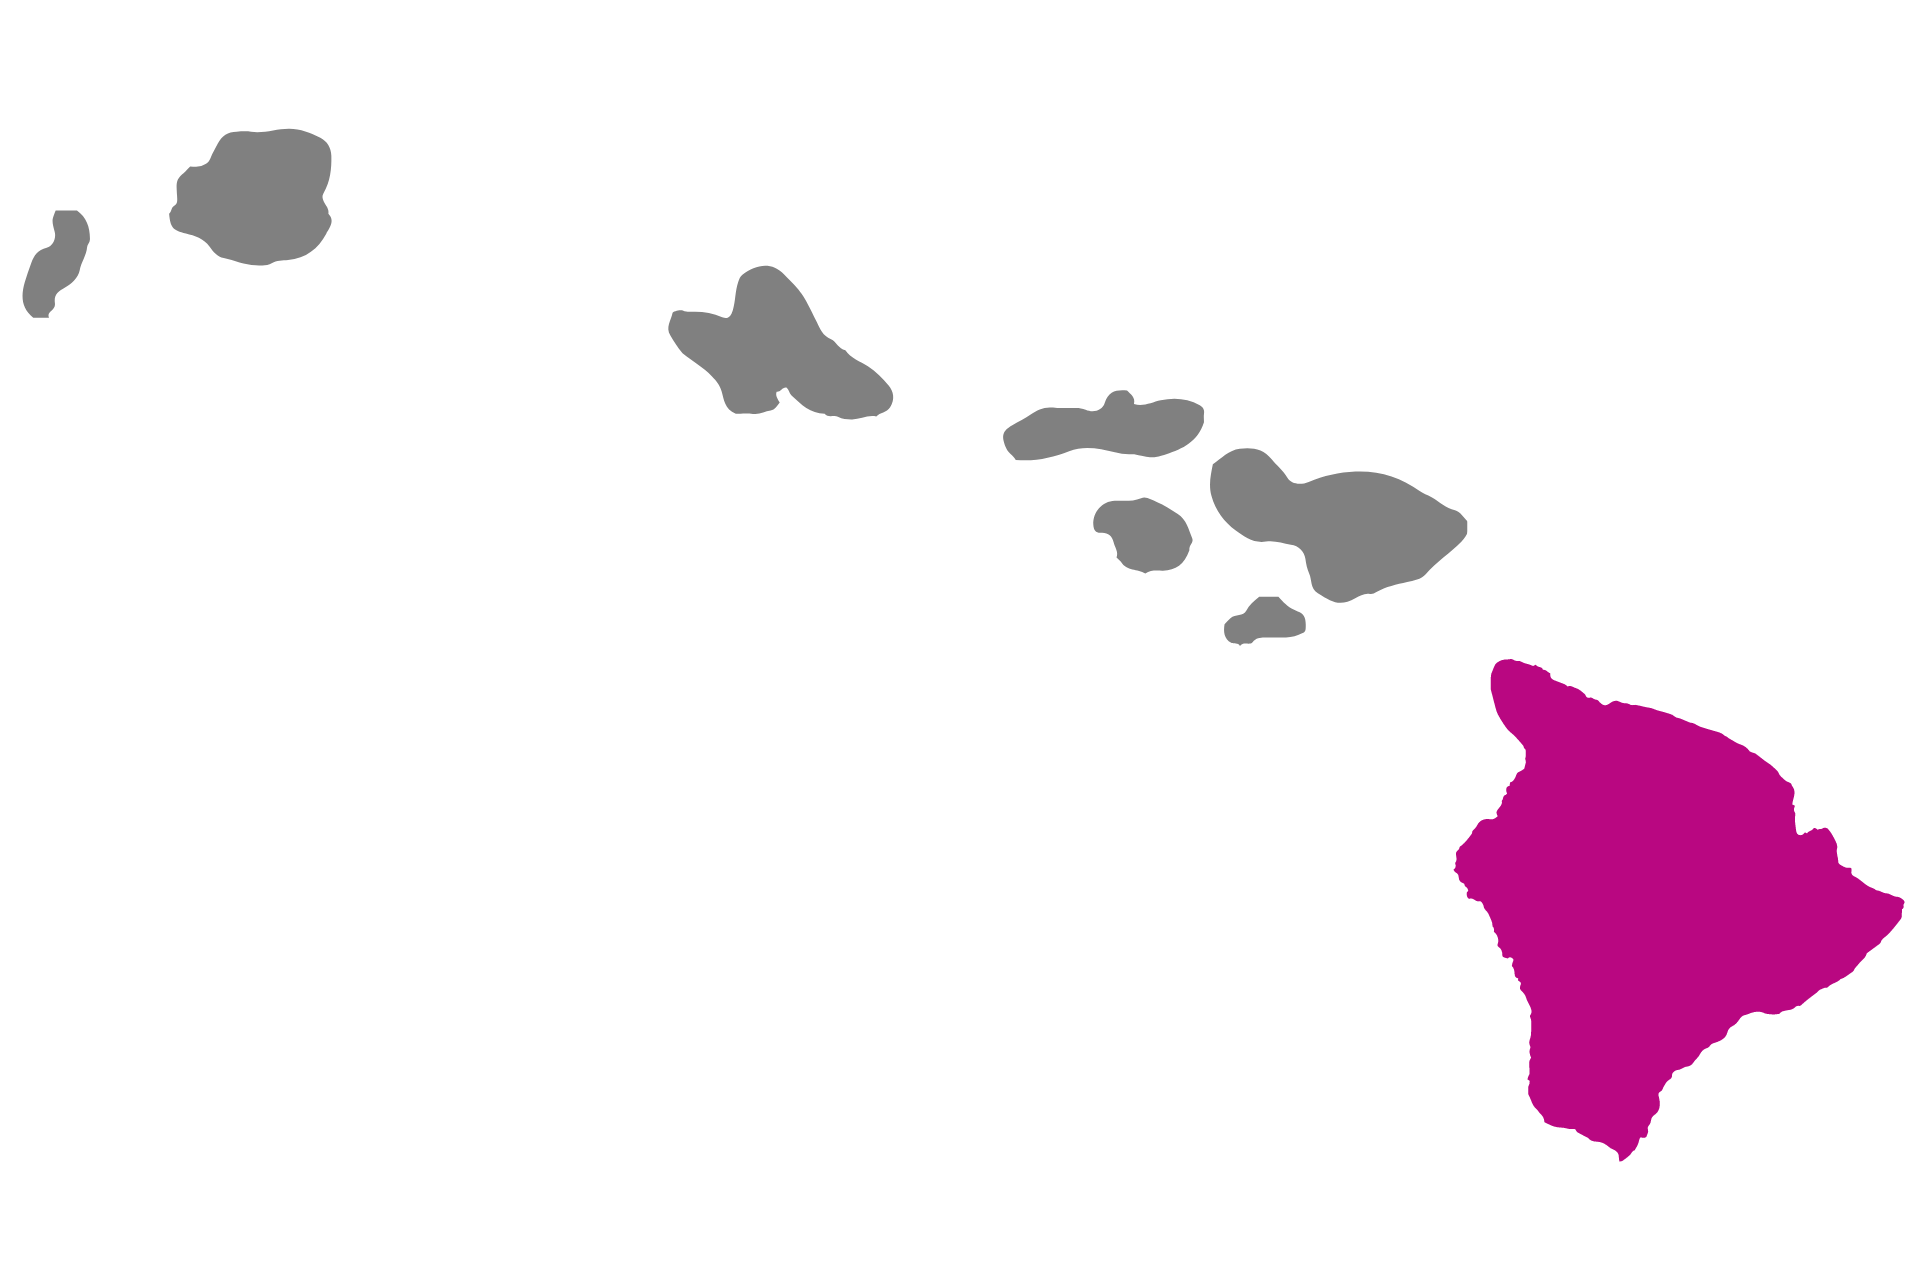 Map of the Hawaiian Islands with the Big Island highlighted in pink